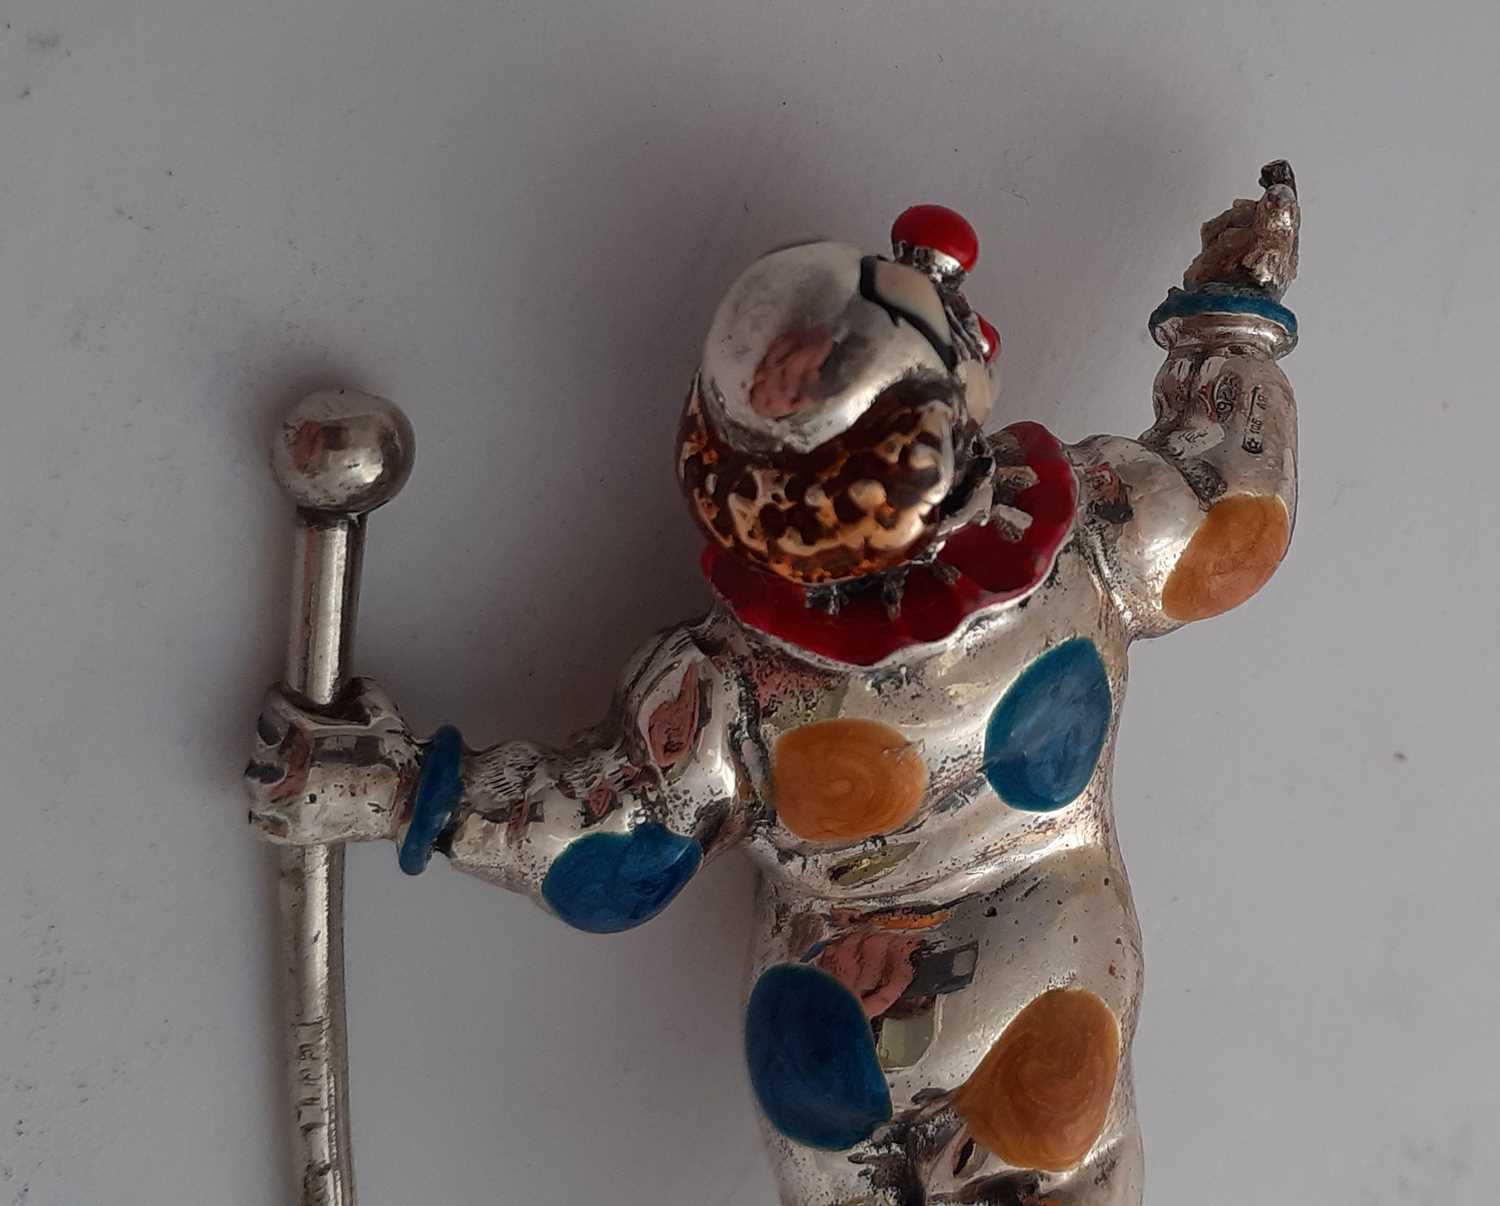 A Collection of Ten Italian Silver and Enamel Clown Figures, Eight by Sorini and Two Attributed to - Image 16 of 16